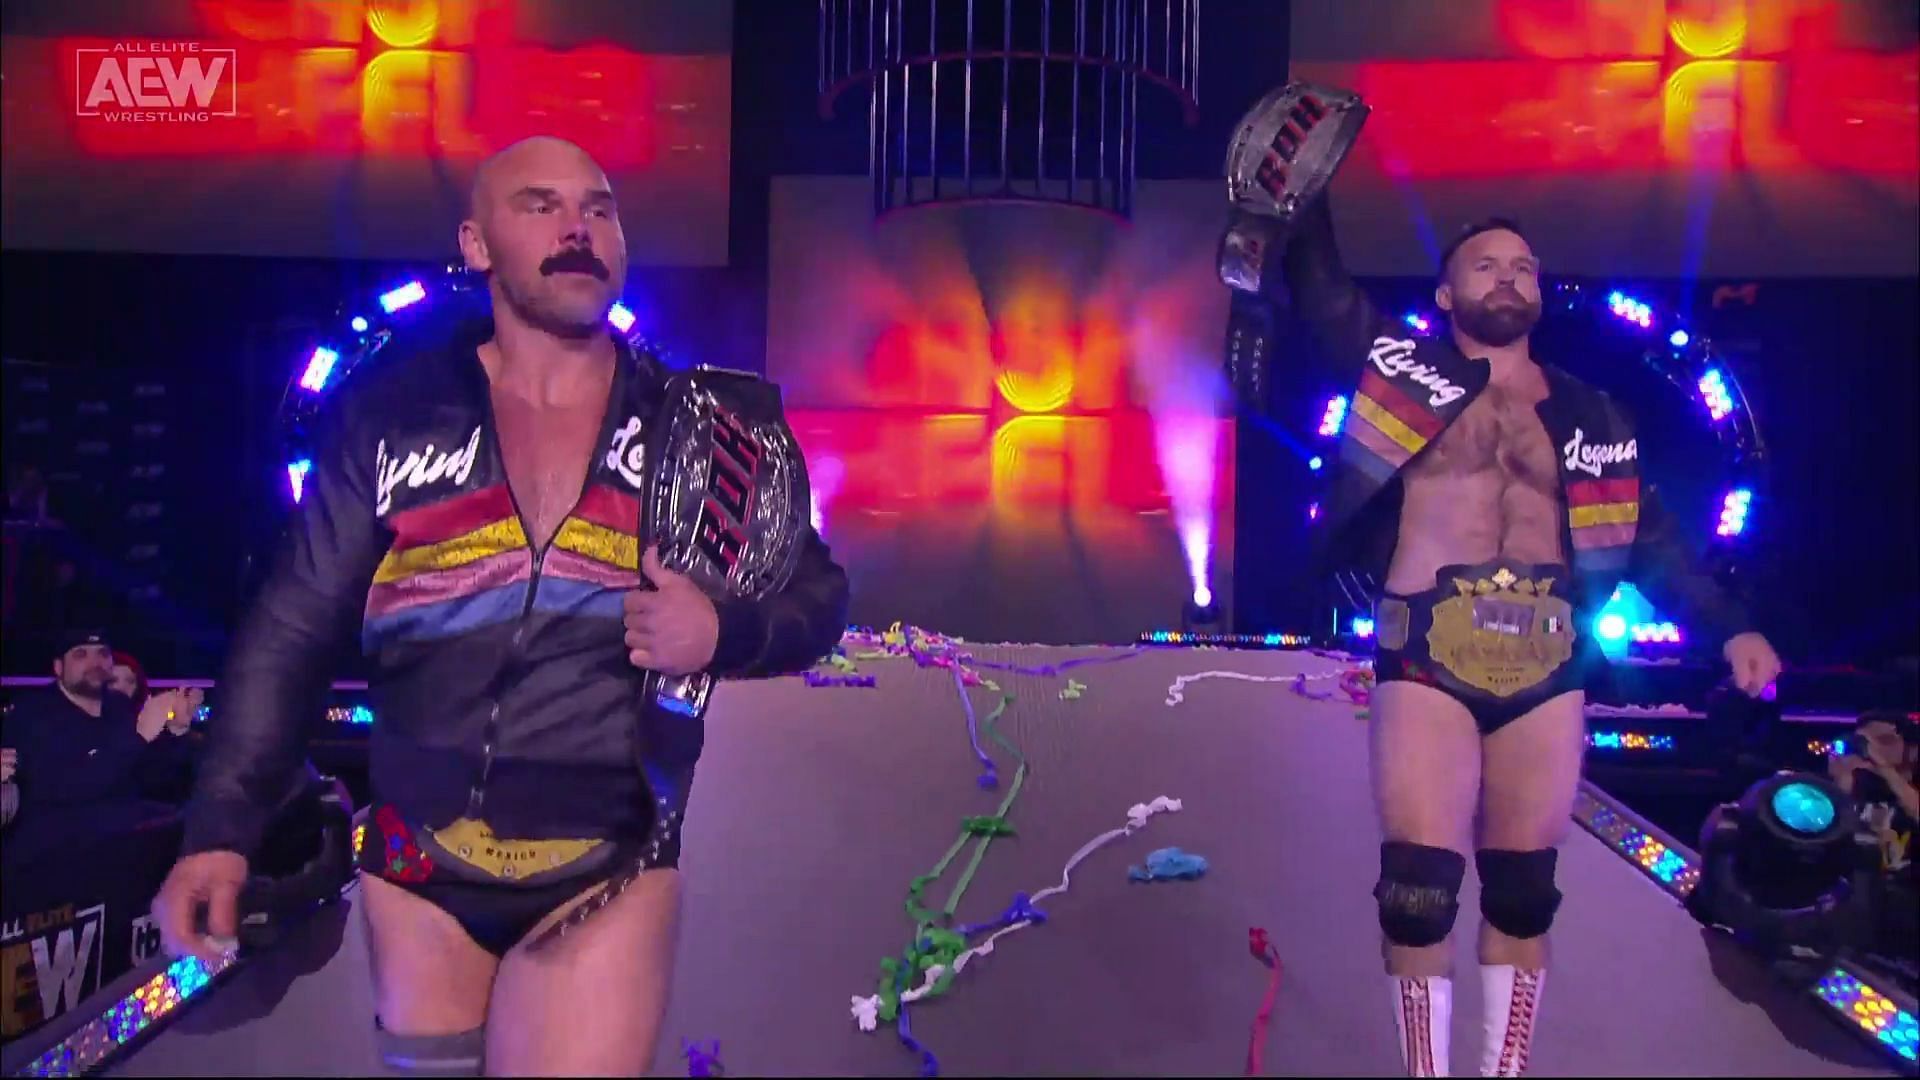 The duo on their way to face The Young Bucks